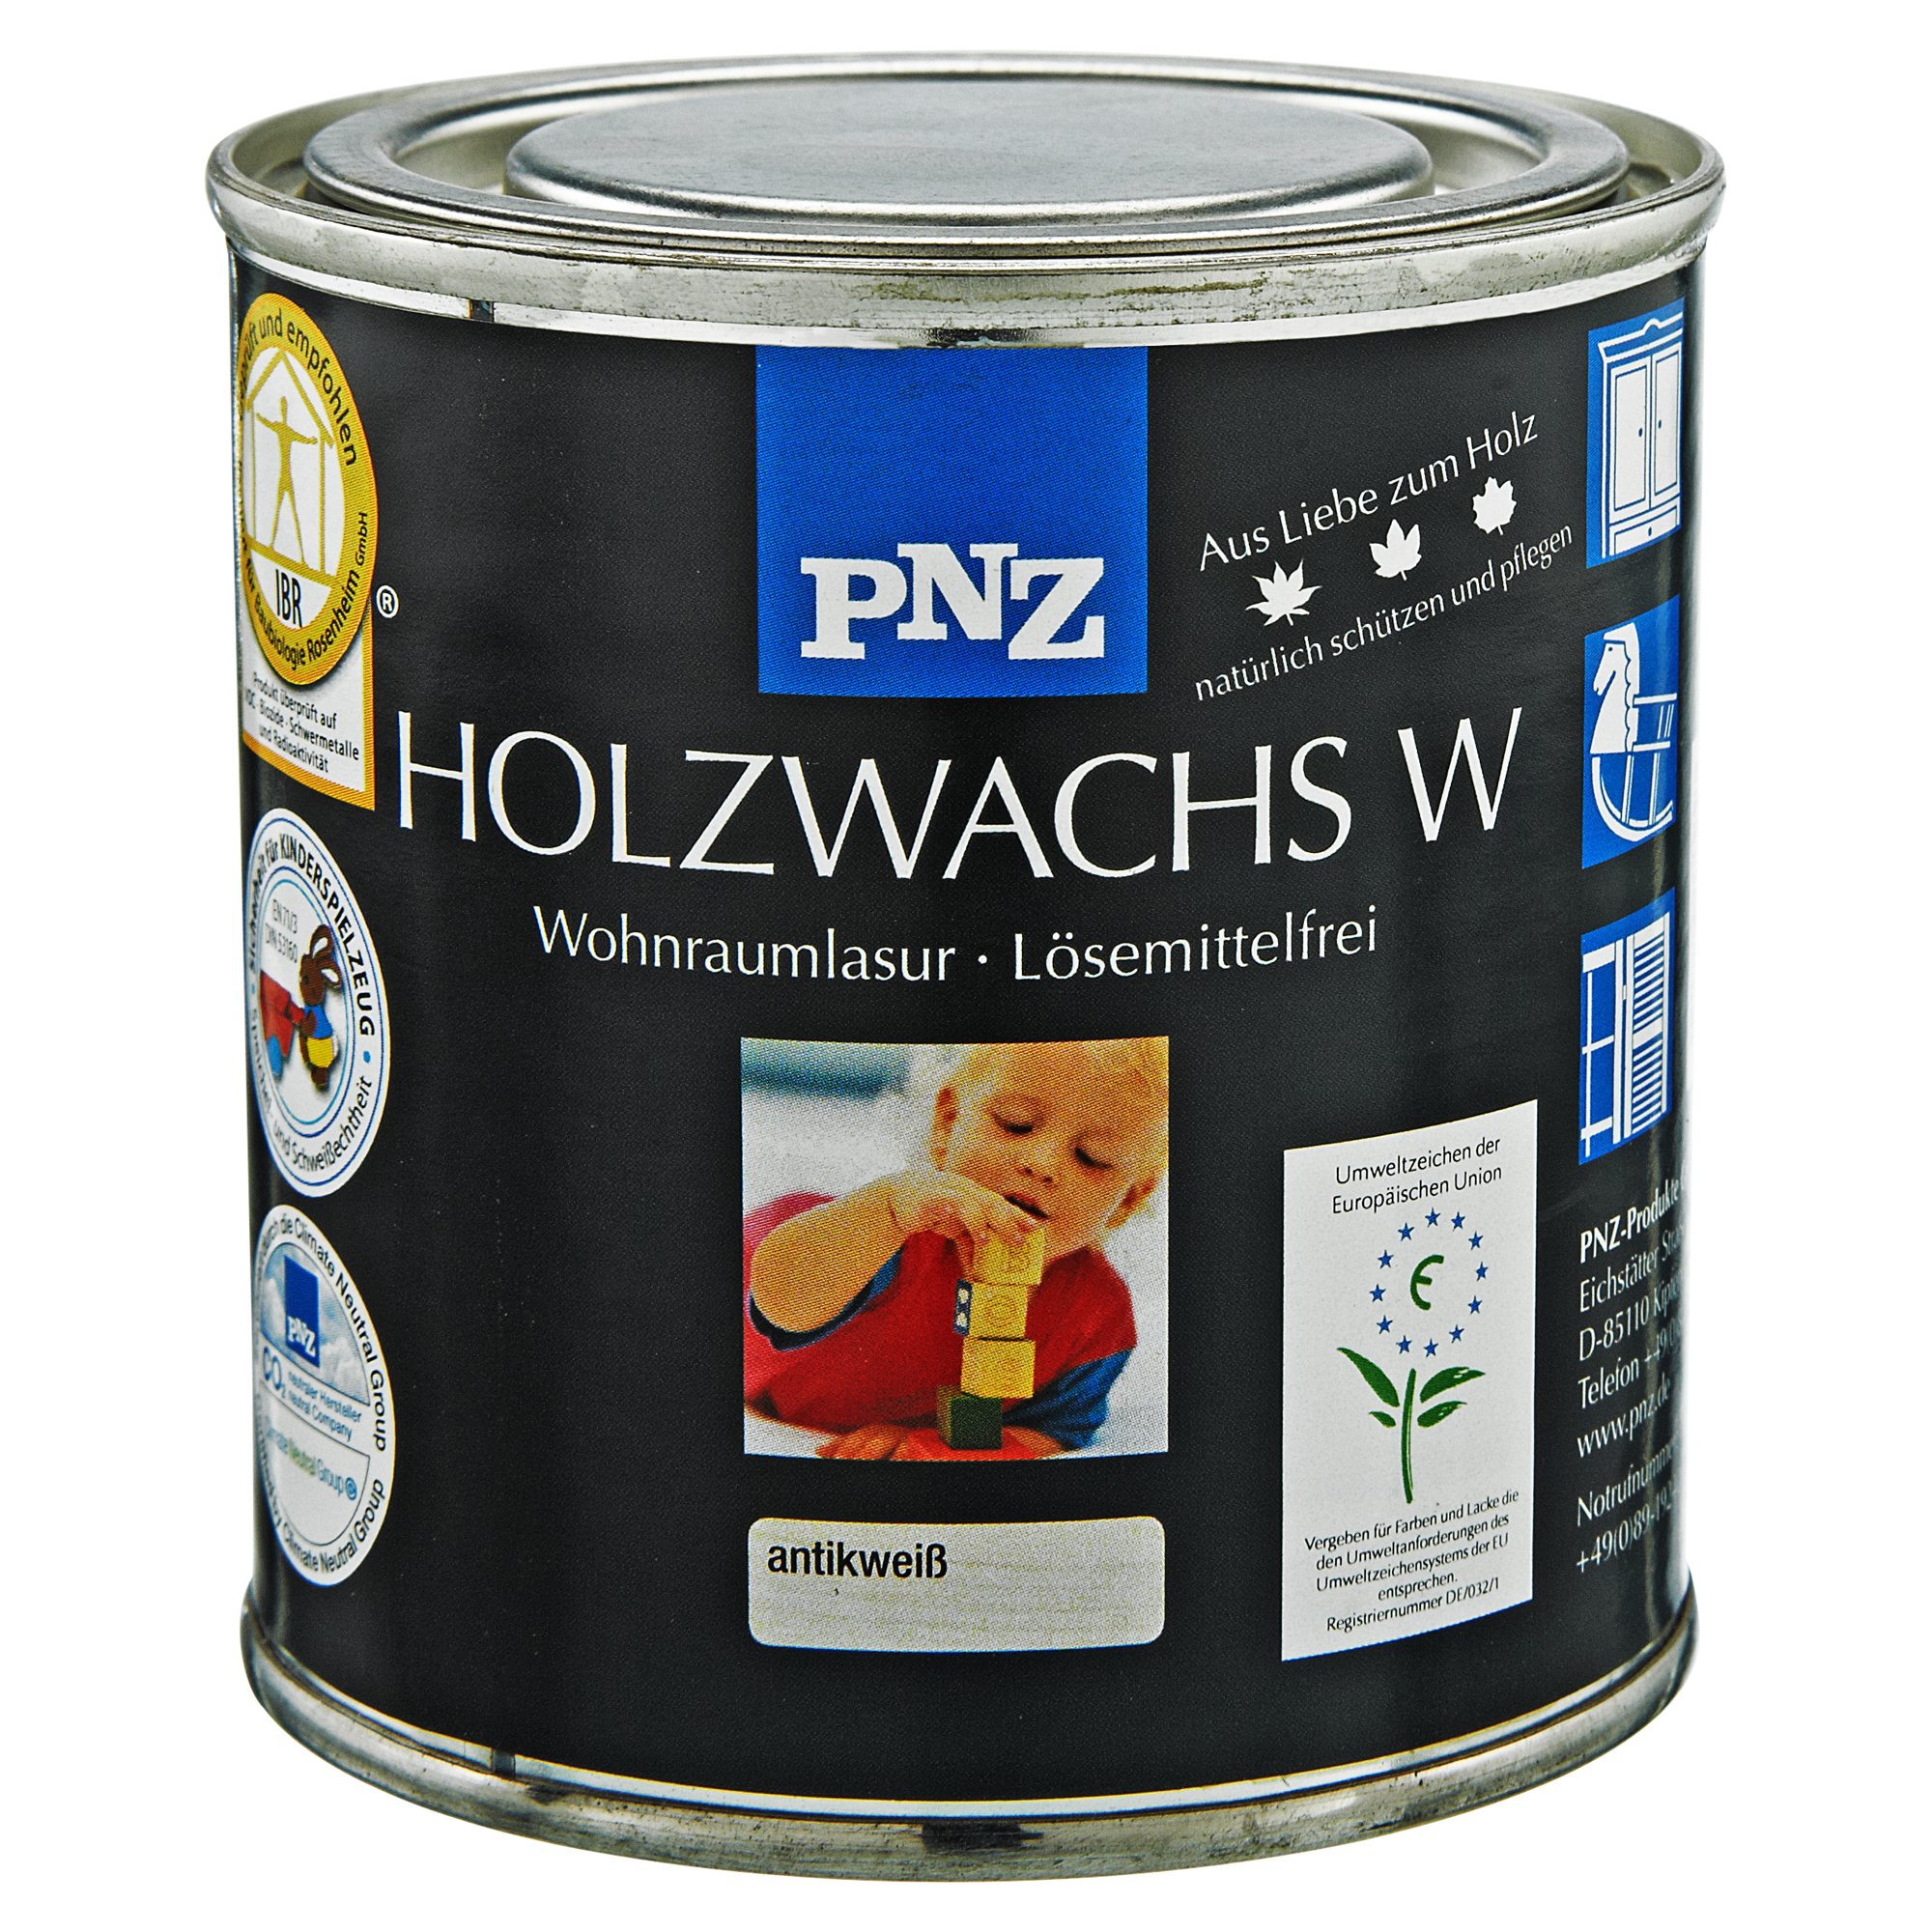 Holzwachs antikweiß 250 ml + product picture